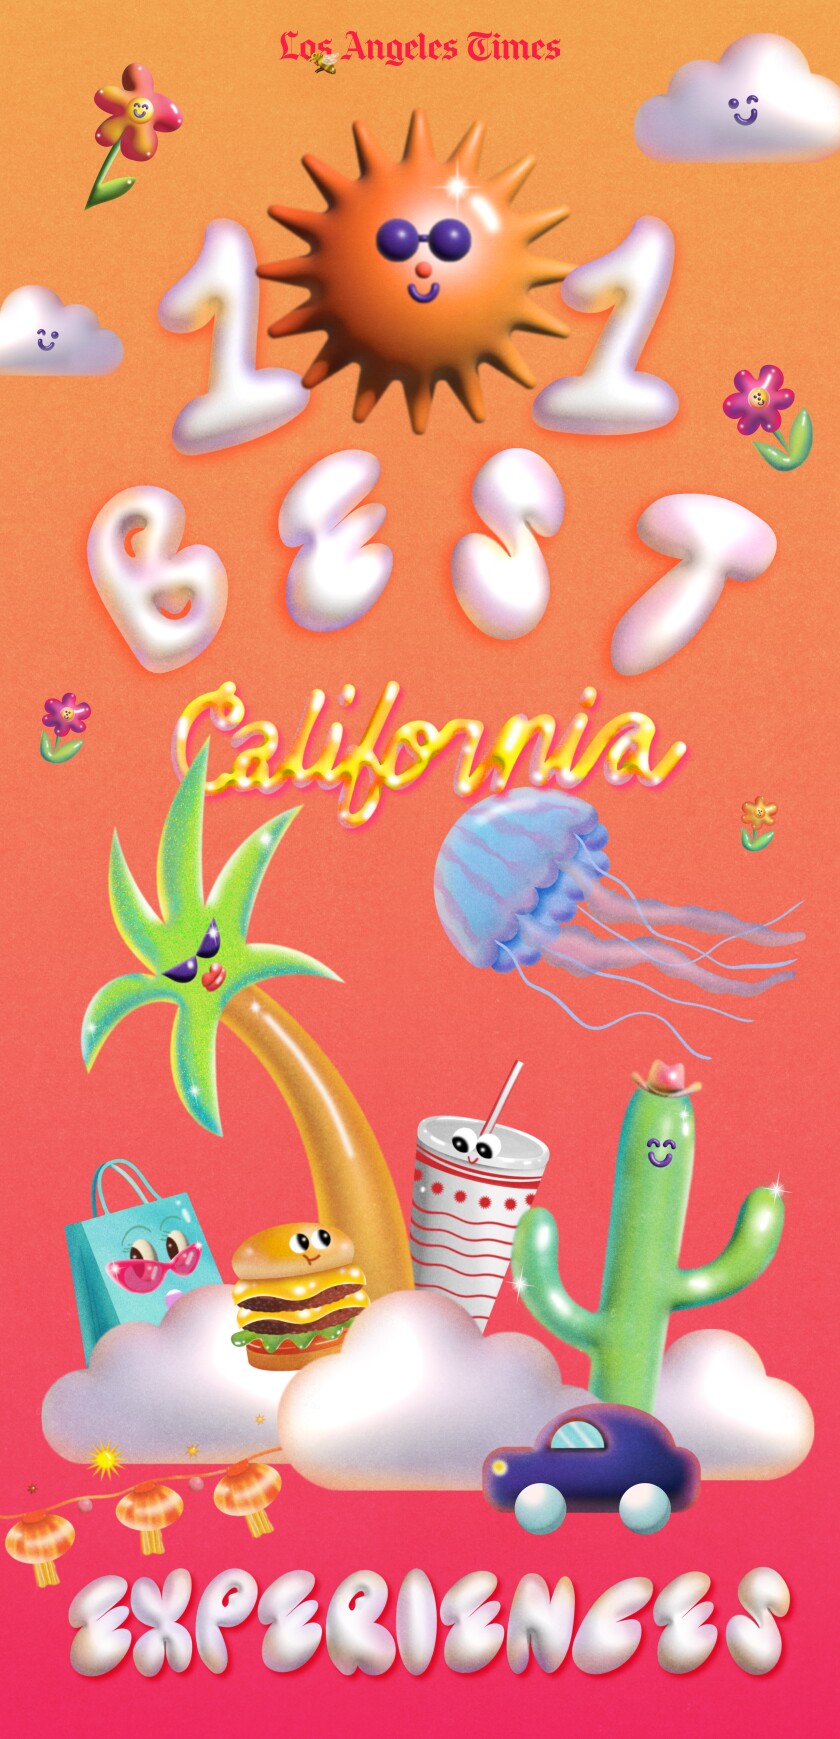 An illustration includes a burger and soda, cactus and palm tree, and the words 